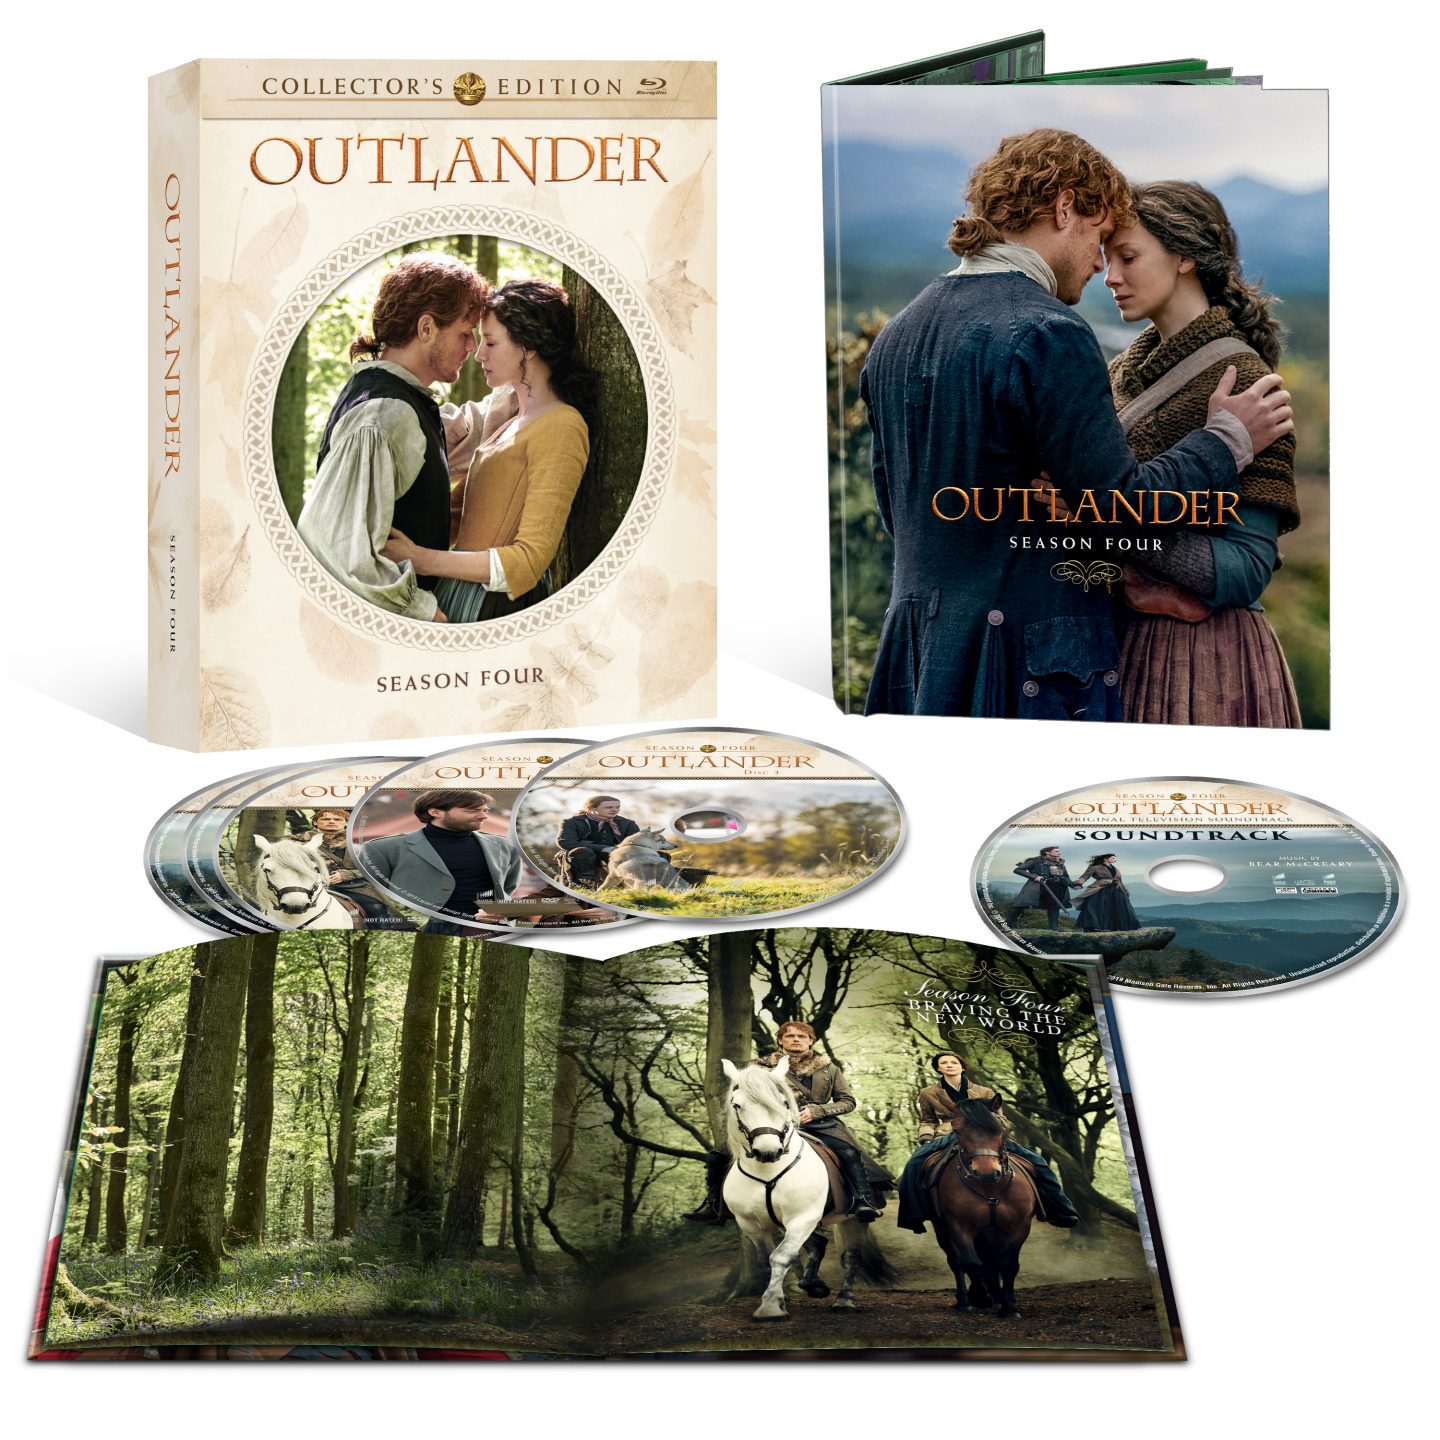 Outlander Season Four Collector's Edition (Sony Pictures Home Entertainment)